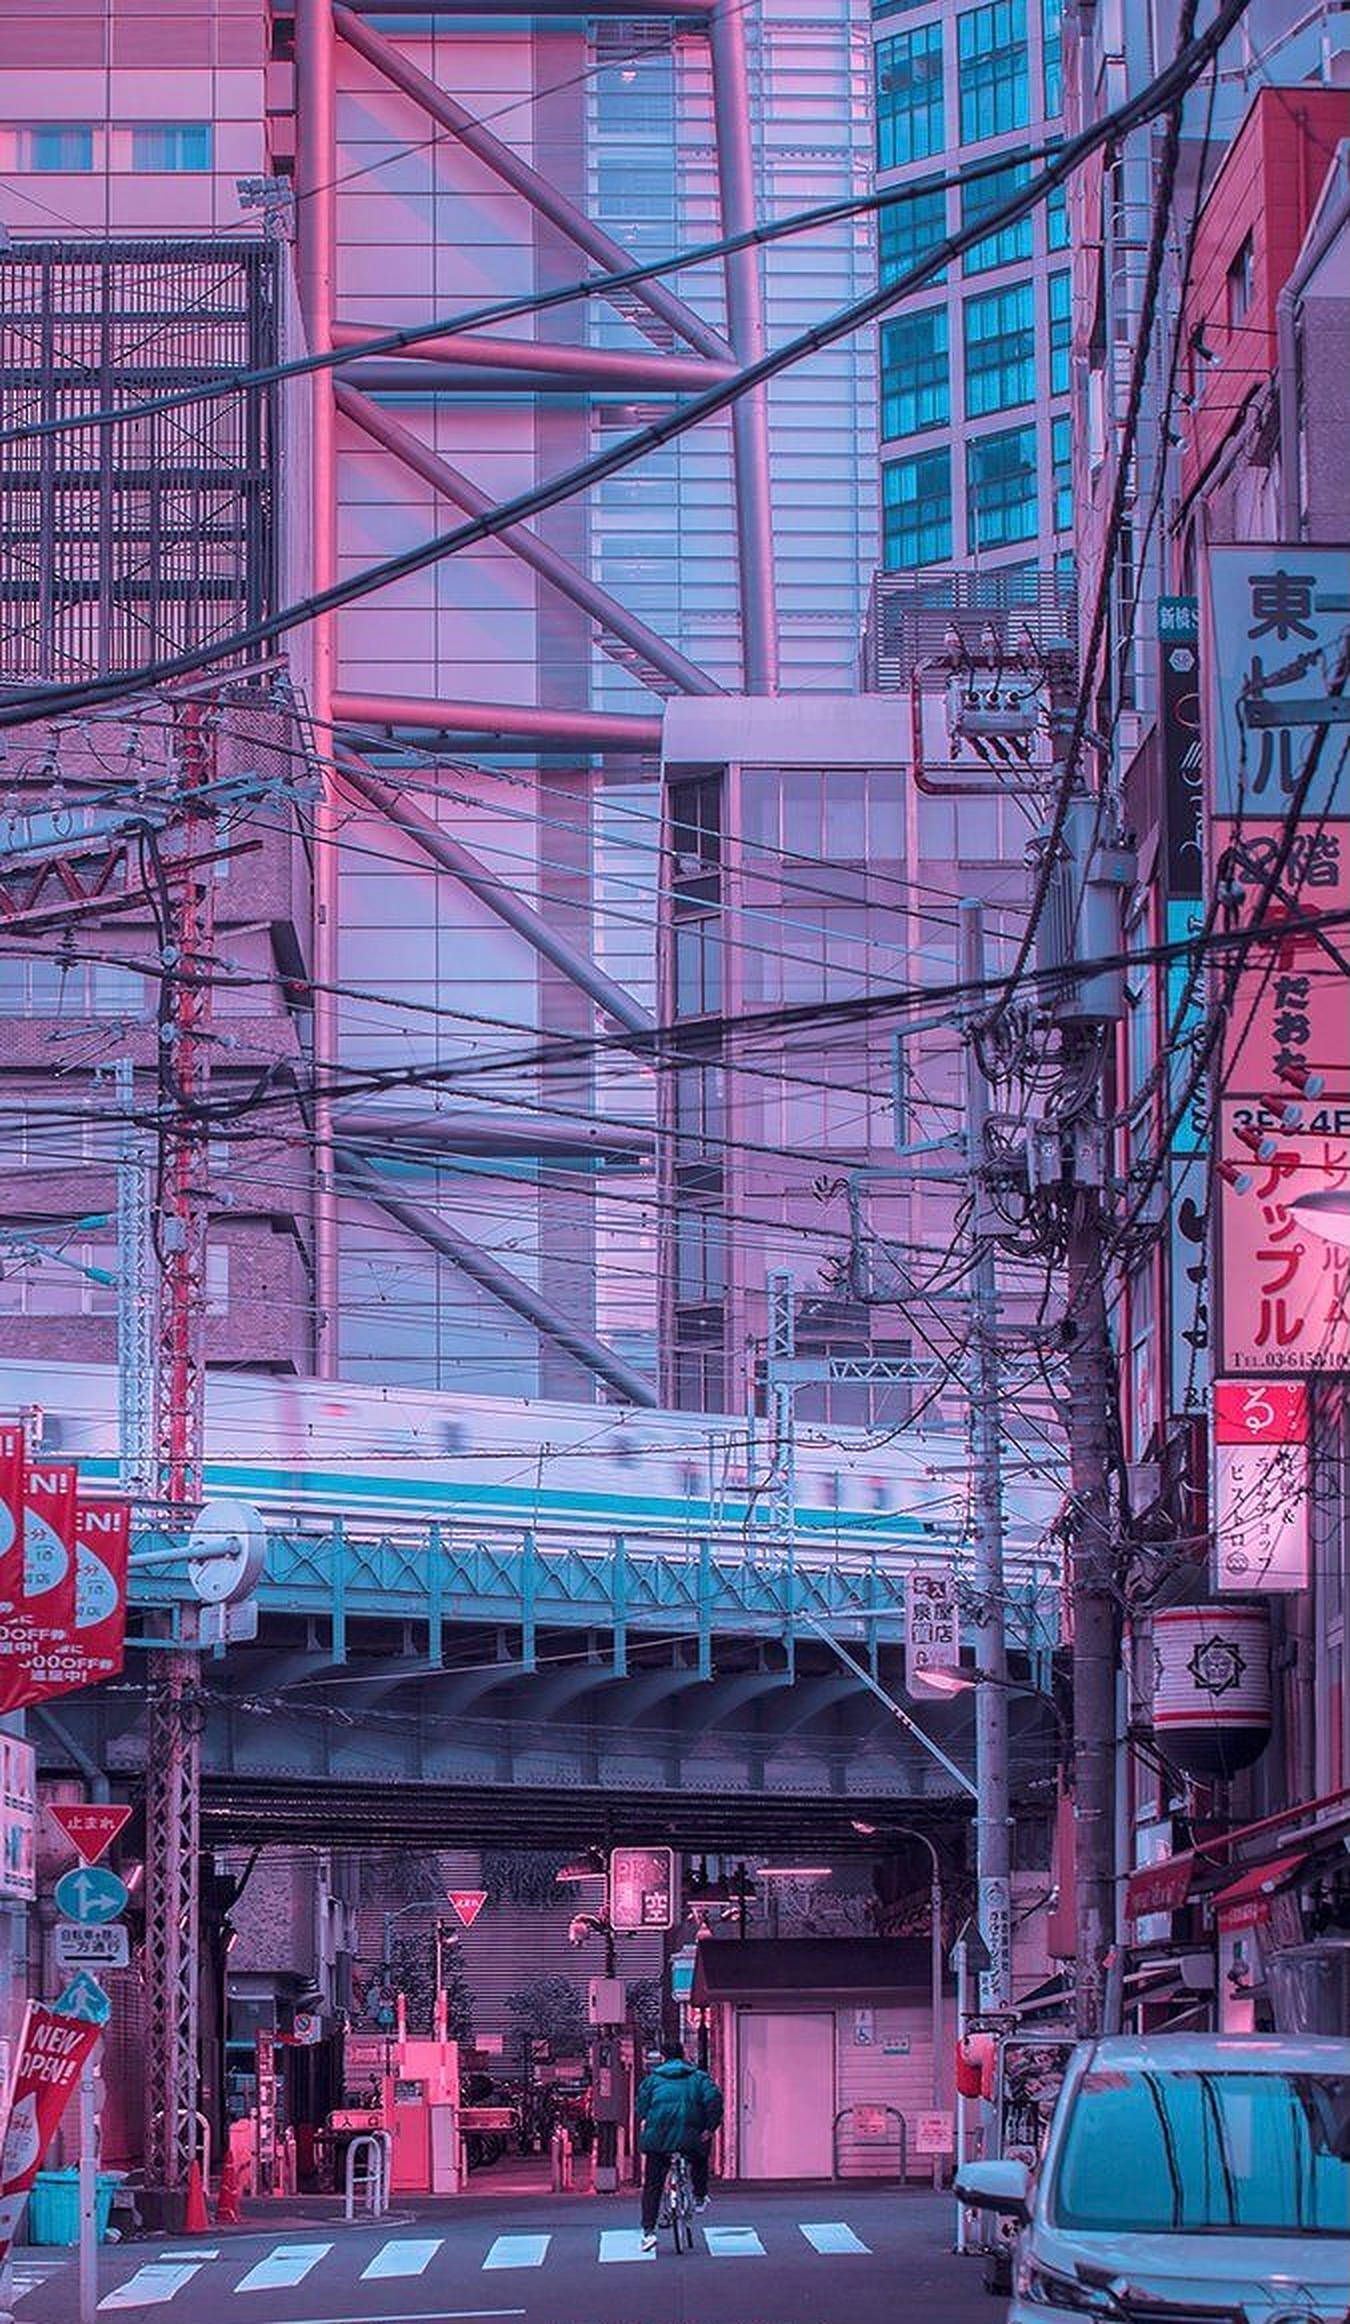 Aesthetic cyberpunk cityscape with neon lights, a train, and a person on a bicycle. - Tokyo